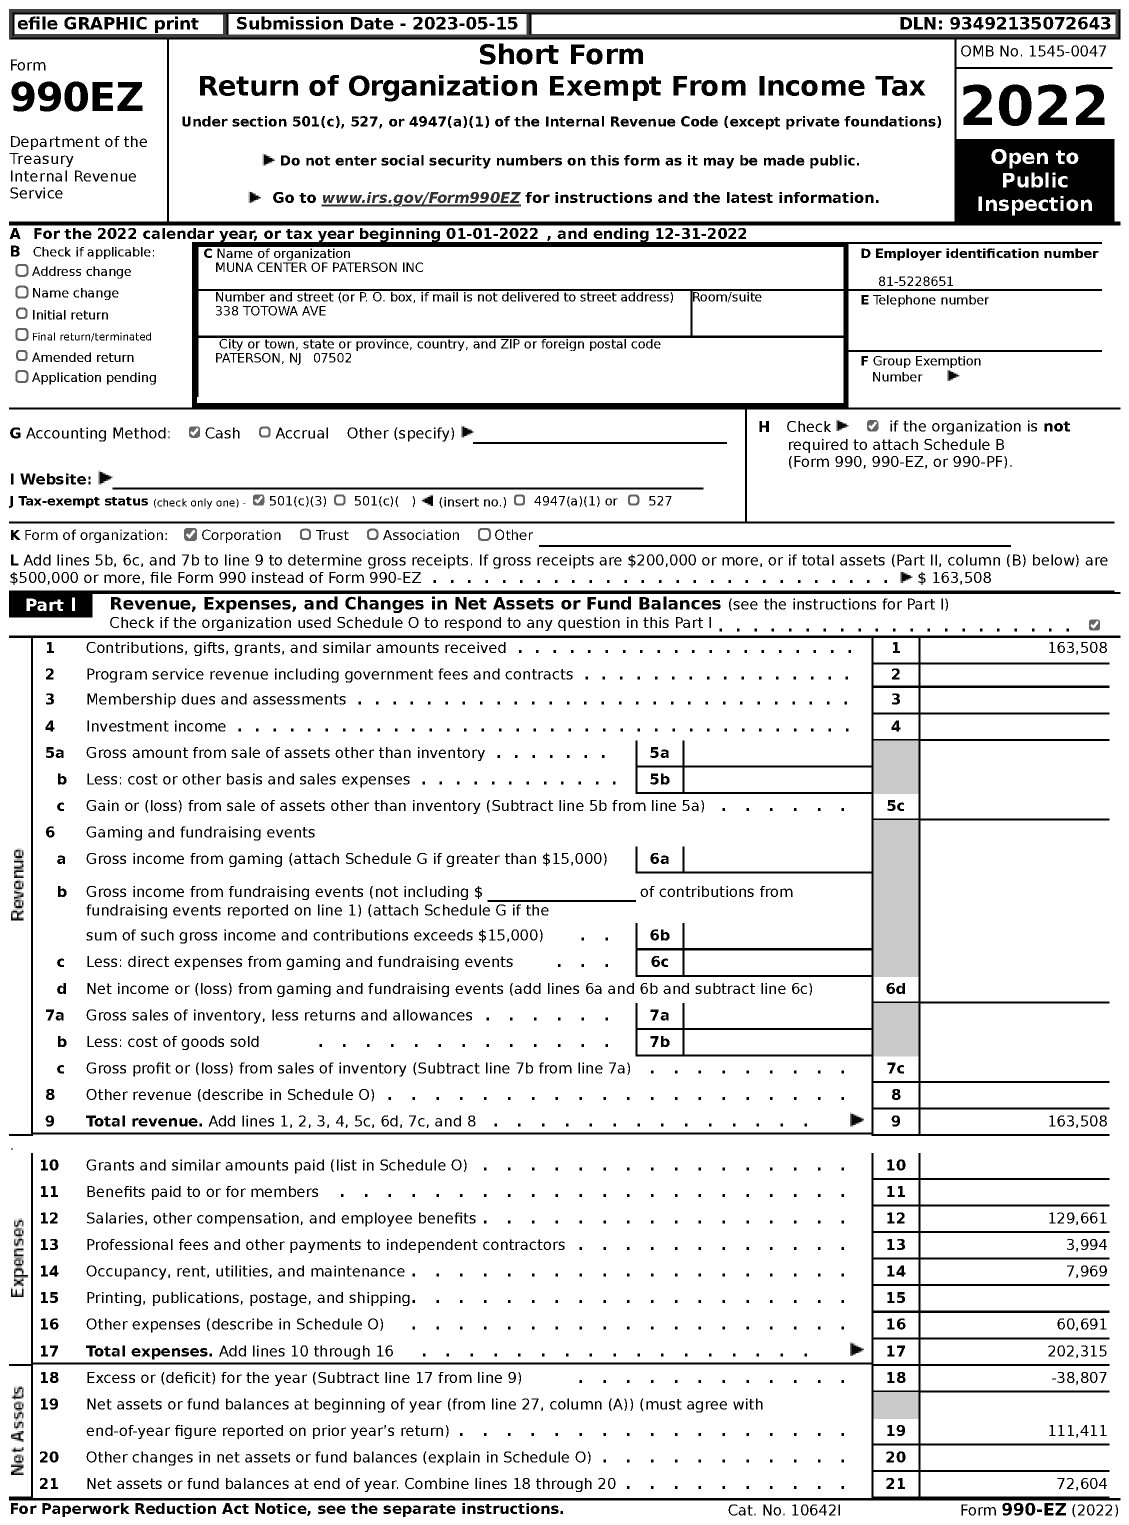 Image of first page of 2022 Form 990EZ for Muna Center of Paterson